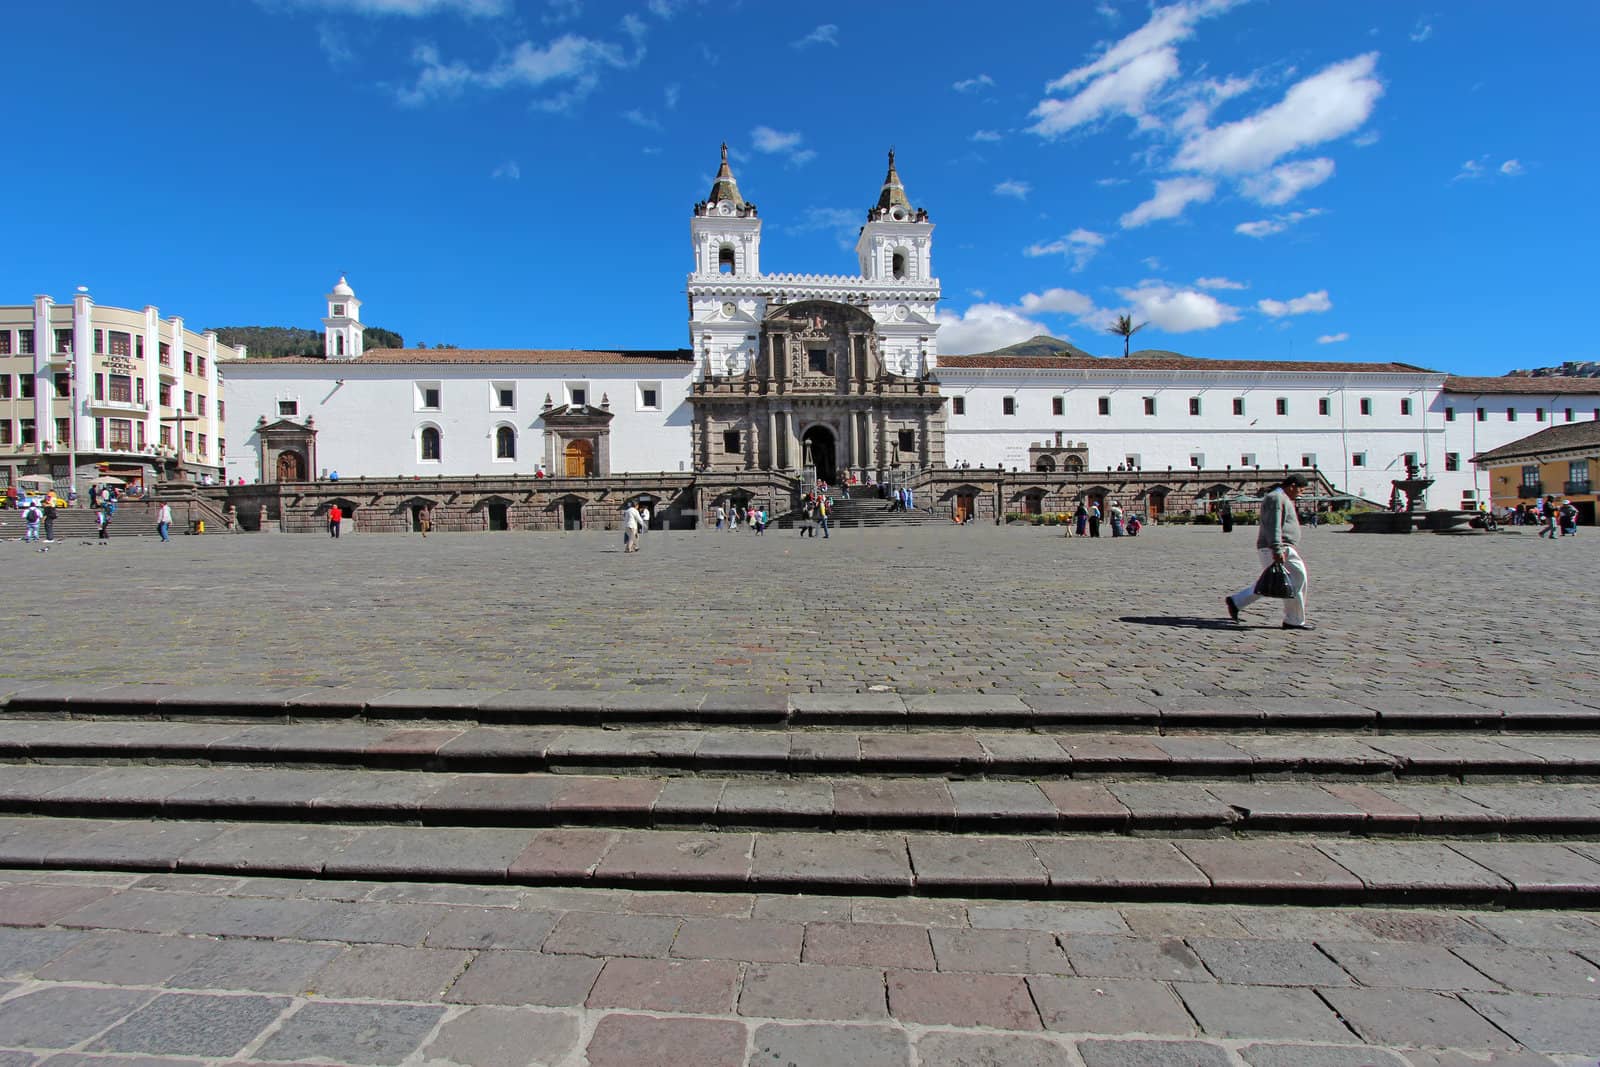 QUITO, ECUADOR - JUNE 1: People go about their business in the plaza in front of the church and convent of San Francisco in the historic part of downtown Quito, Ecuador against a bright blue sky and white clouds on June 1, 2012